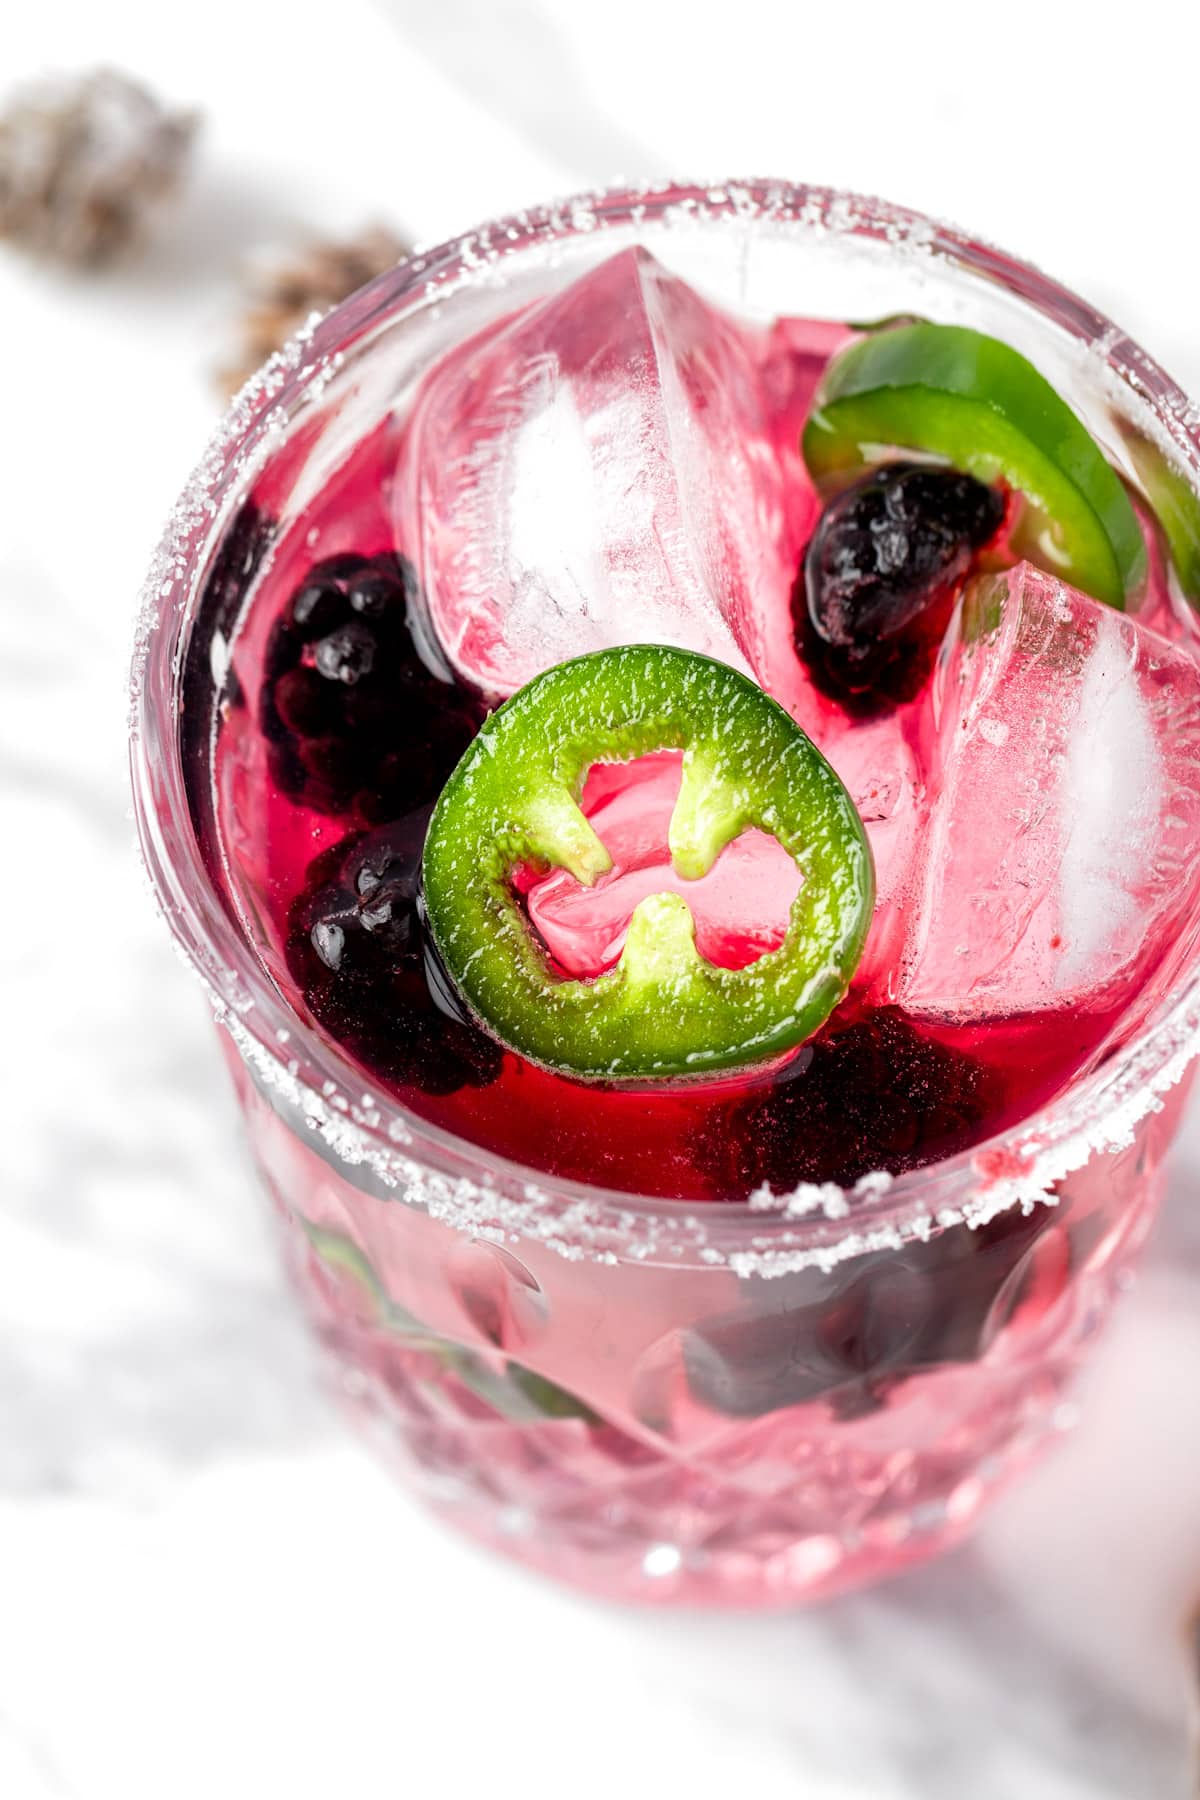 A blackberry jalapeno margarita garnished with blackberries and jalapeno slices.